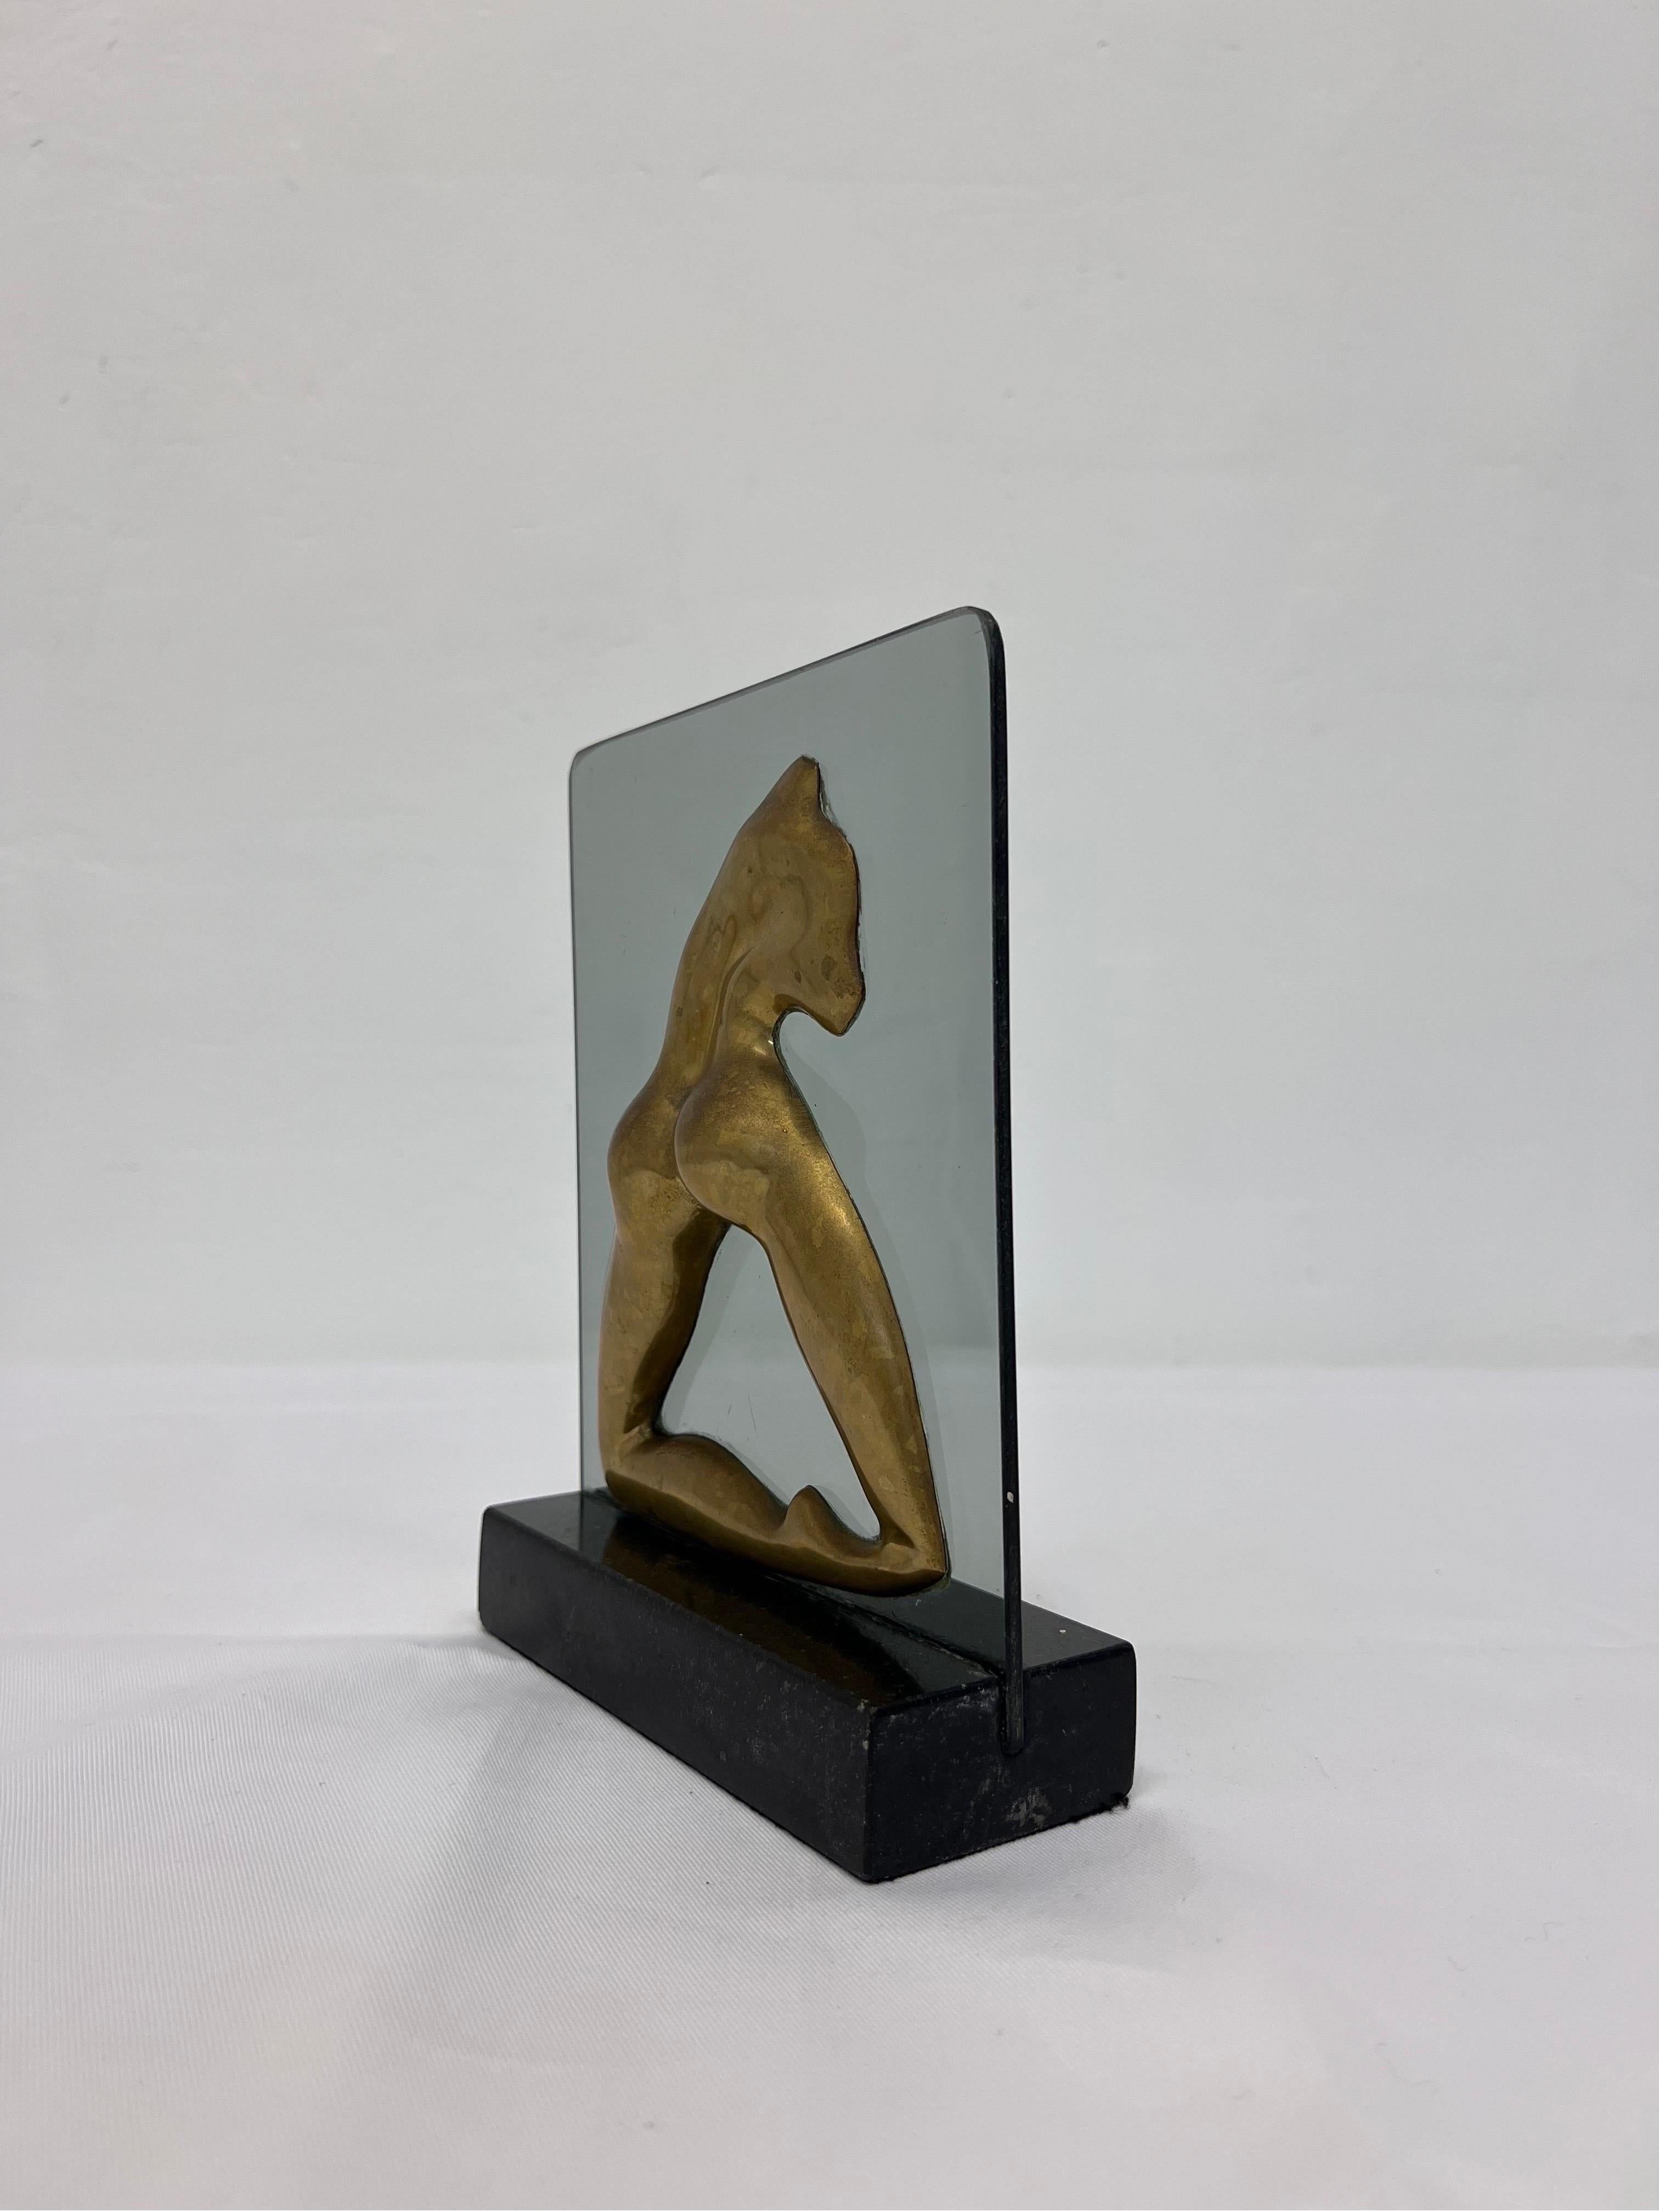 Brazilian Mid-Century Modern Bronze Sculpture on Glass and Granite Base, 1960s For Sale 3